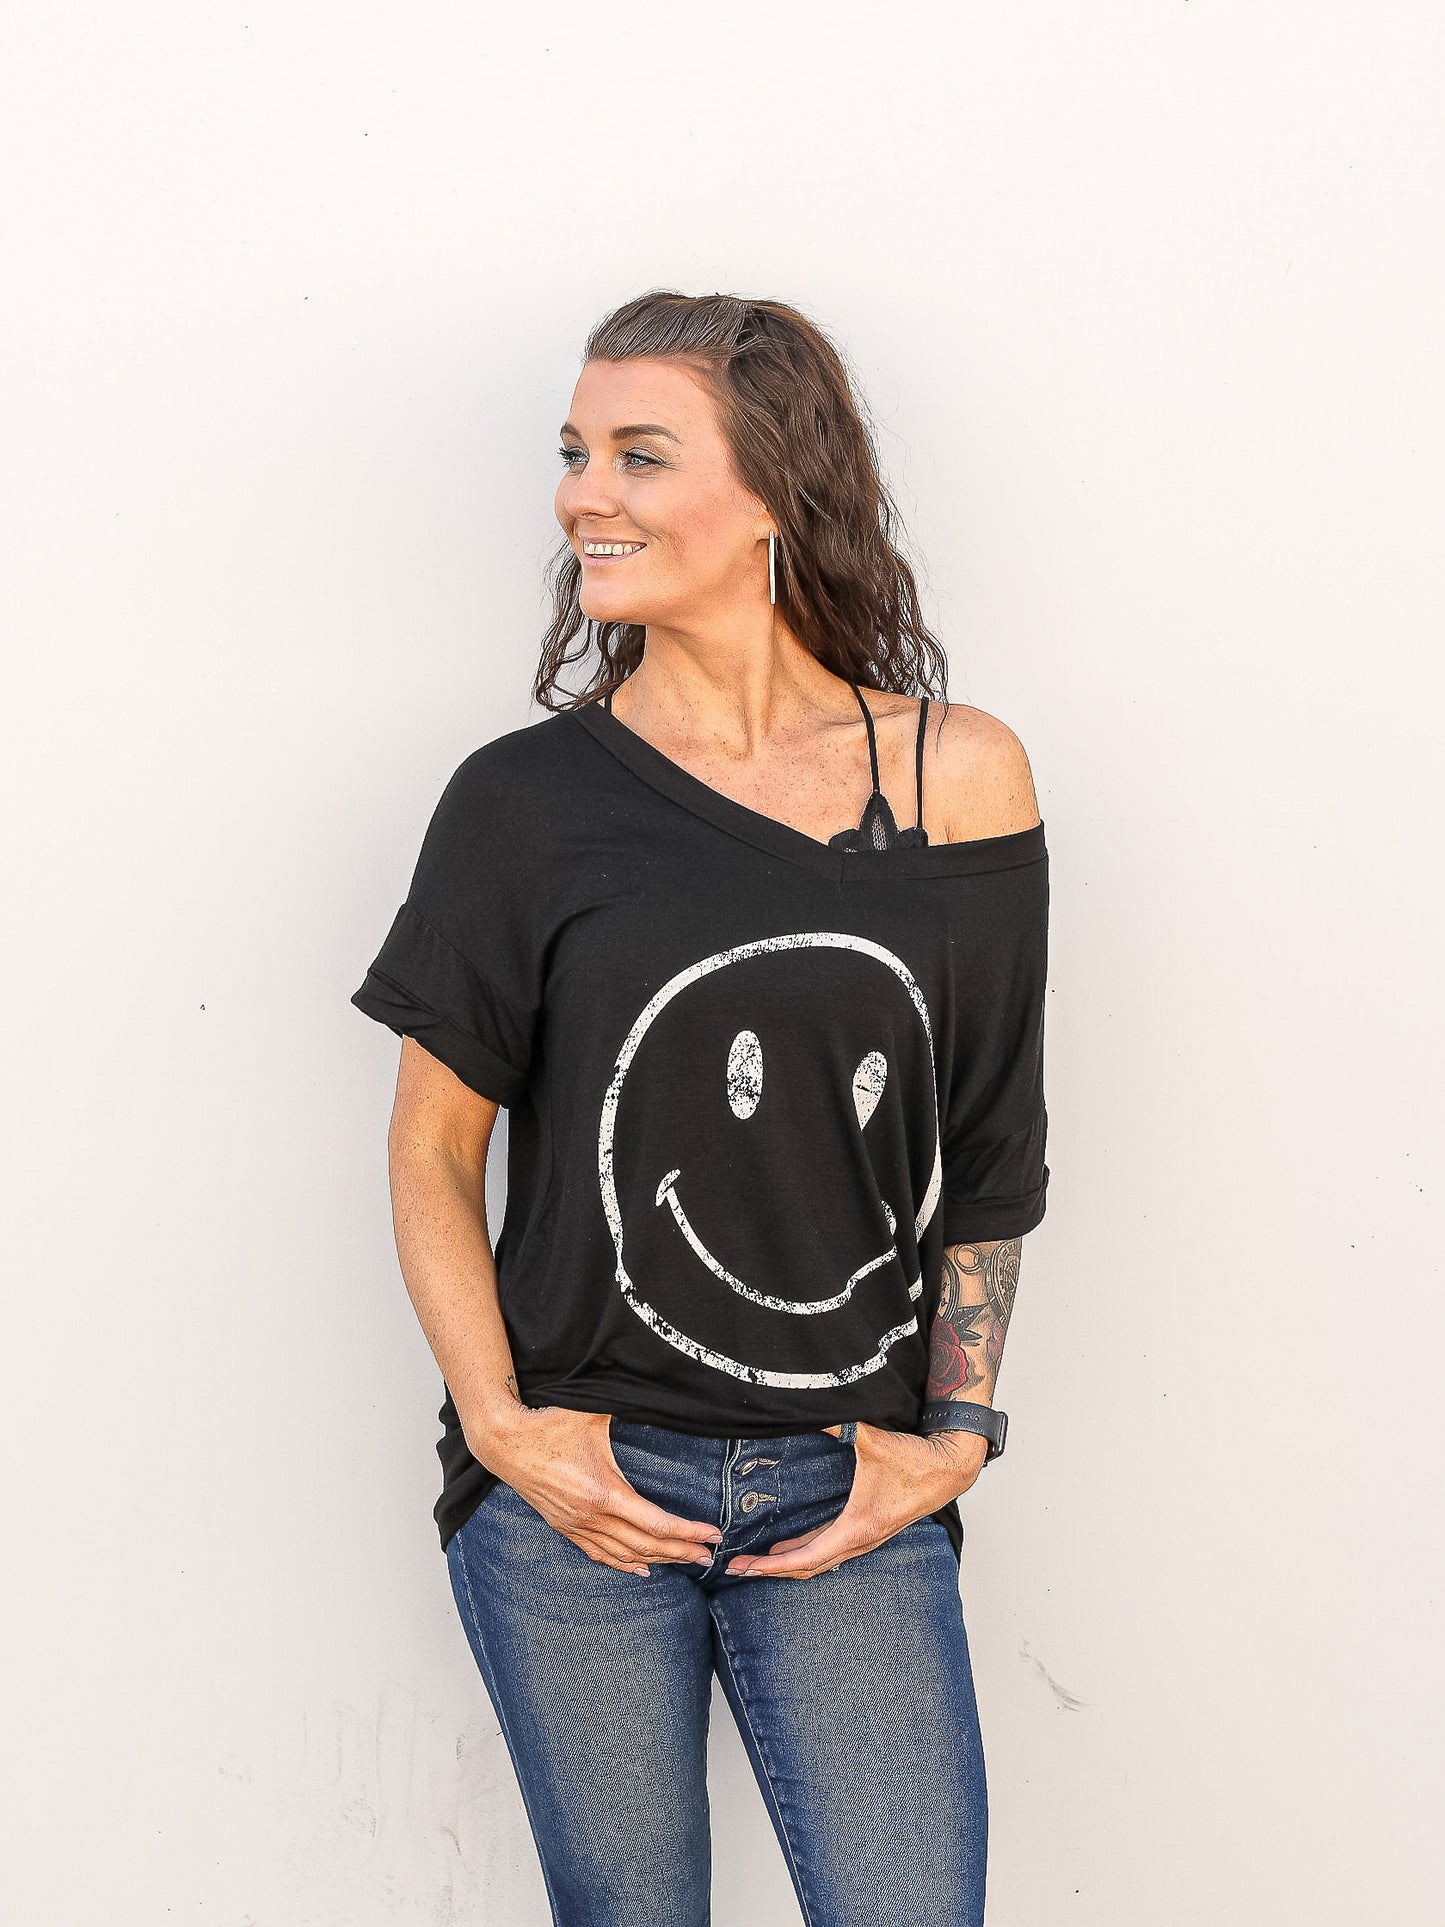 Black short sleeve smily tee pulled off the shoulder with denim pants. 